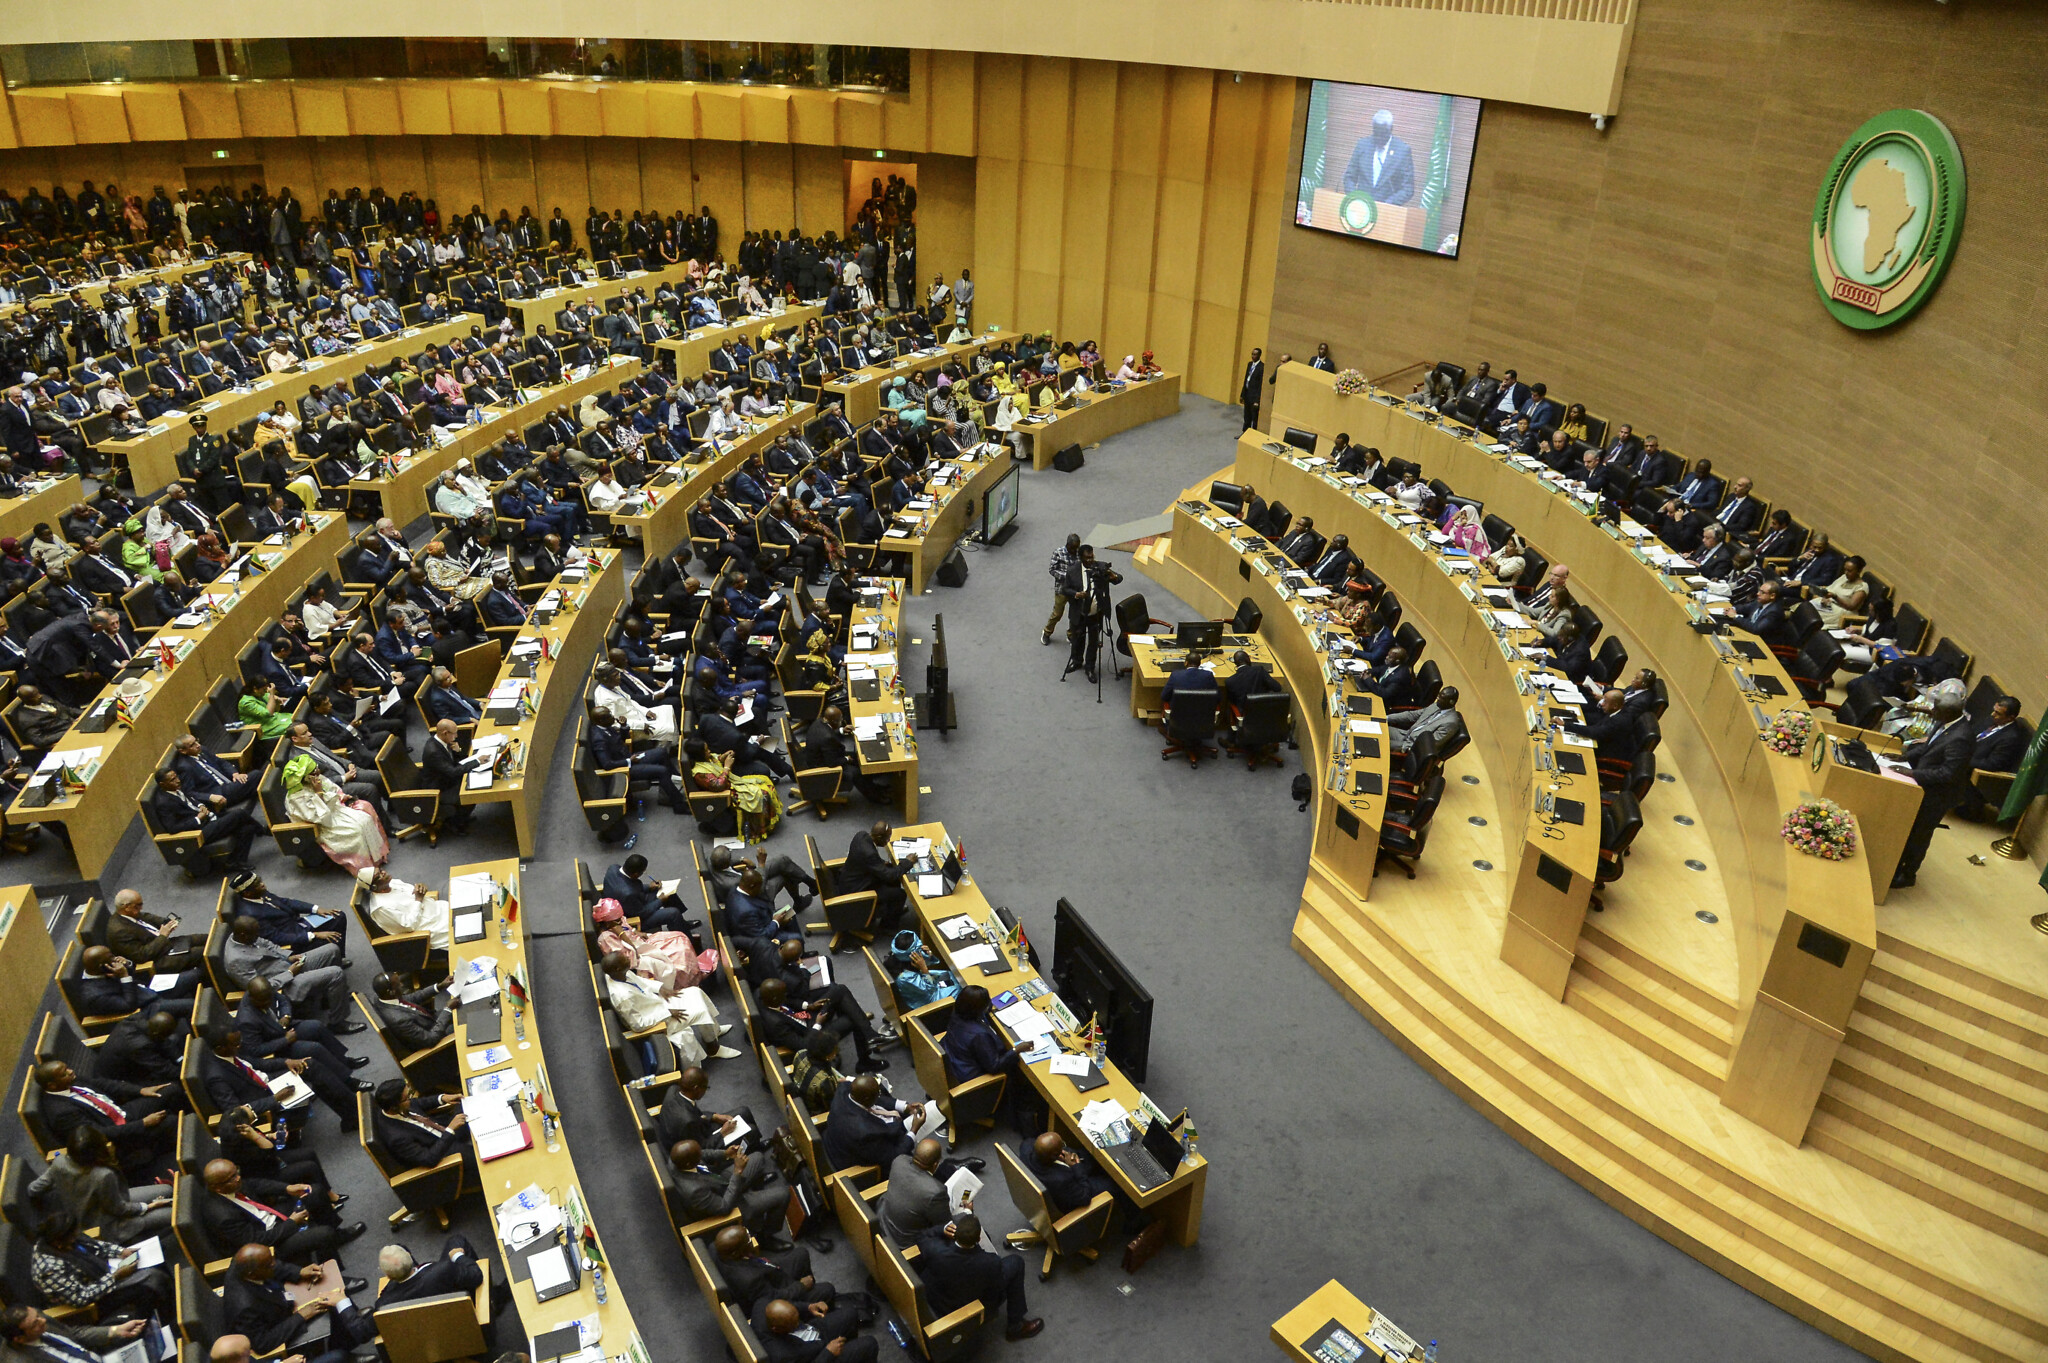 14 African states agree to kick Israel out of African Union